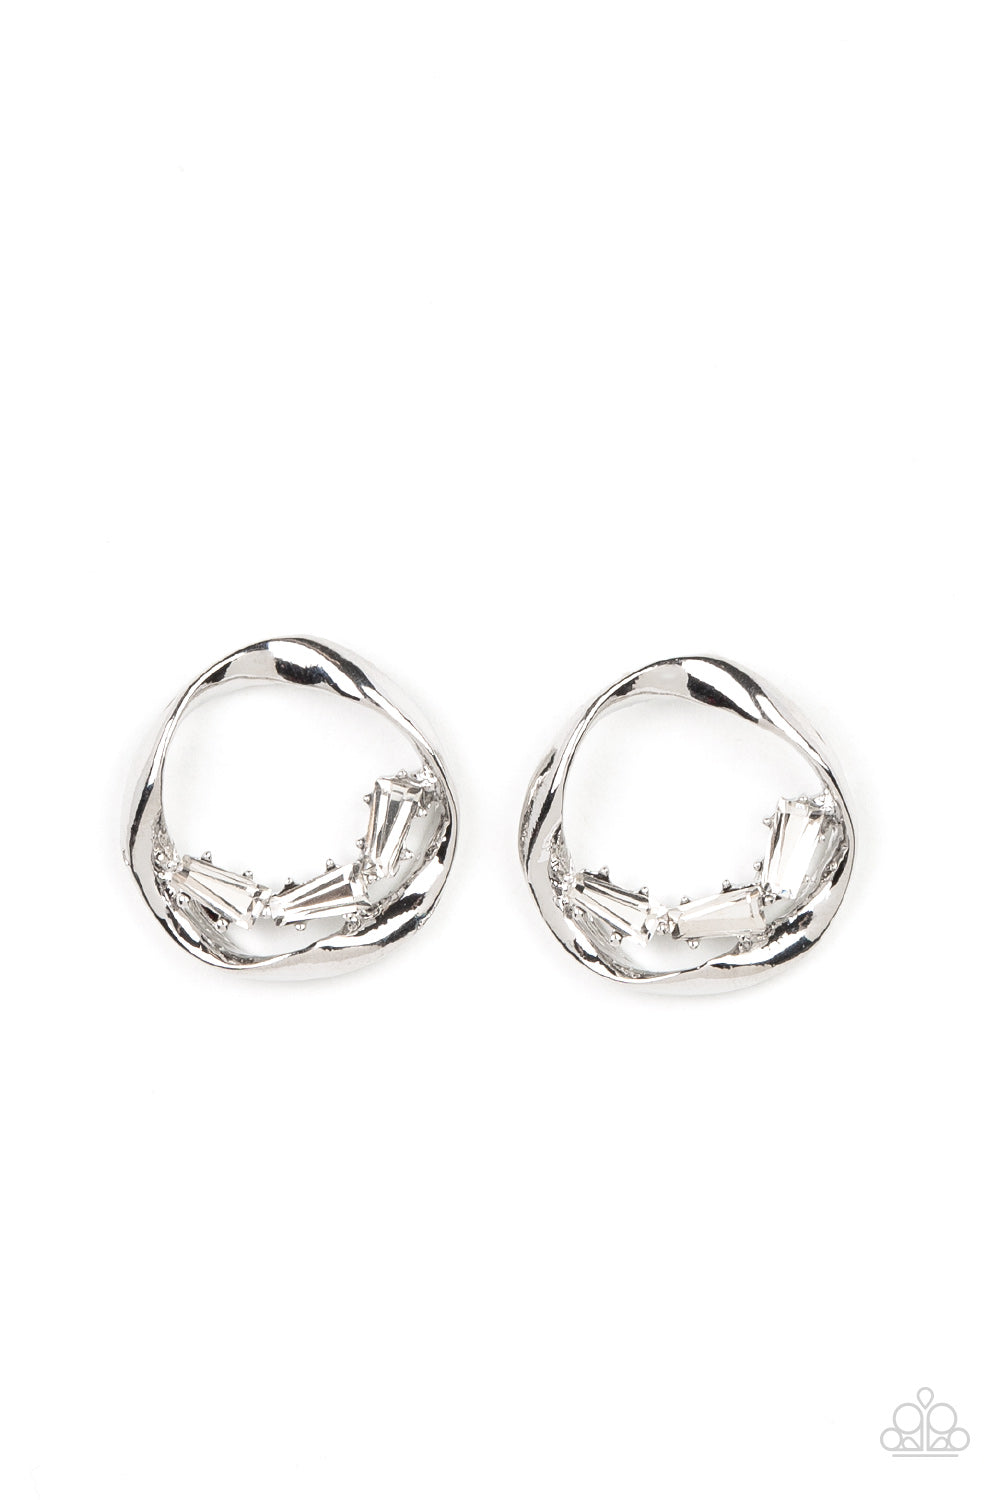 Imperfect Illumination Paparazzi Accessories Earrings - White